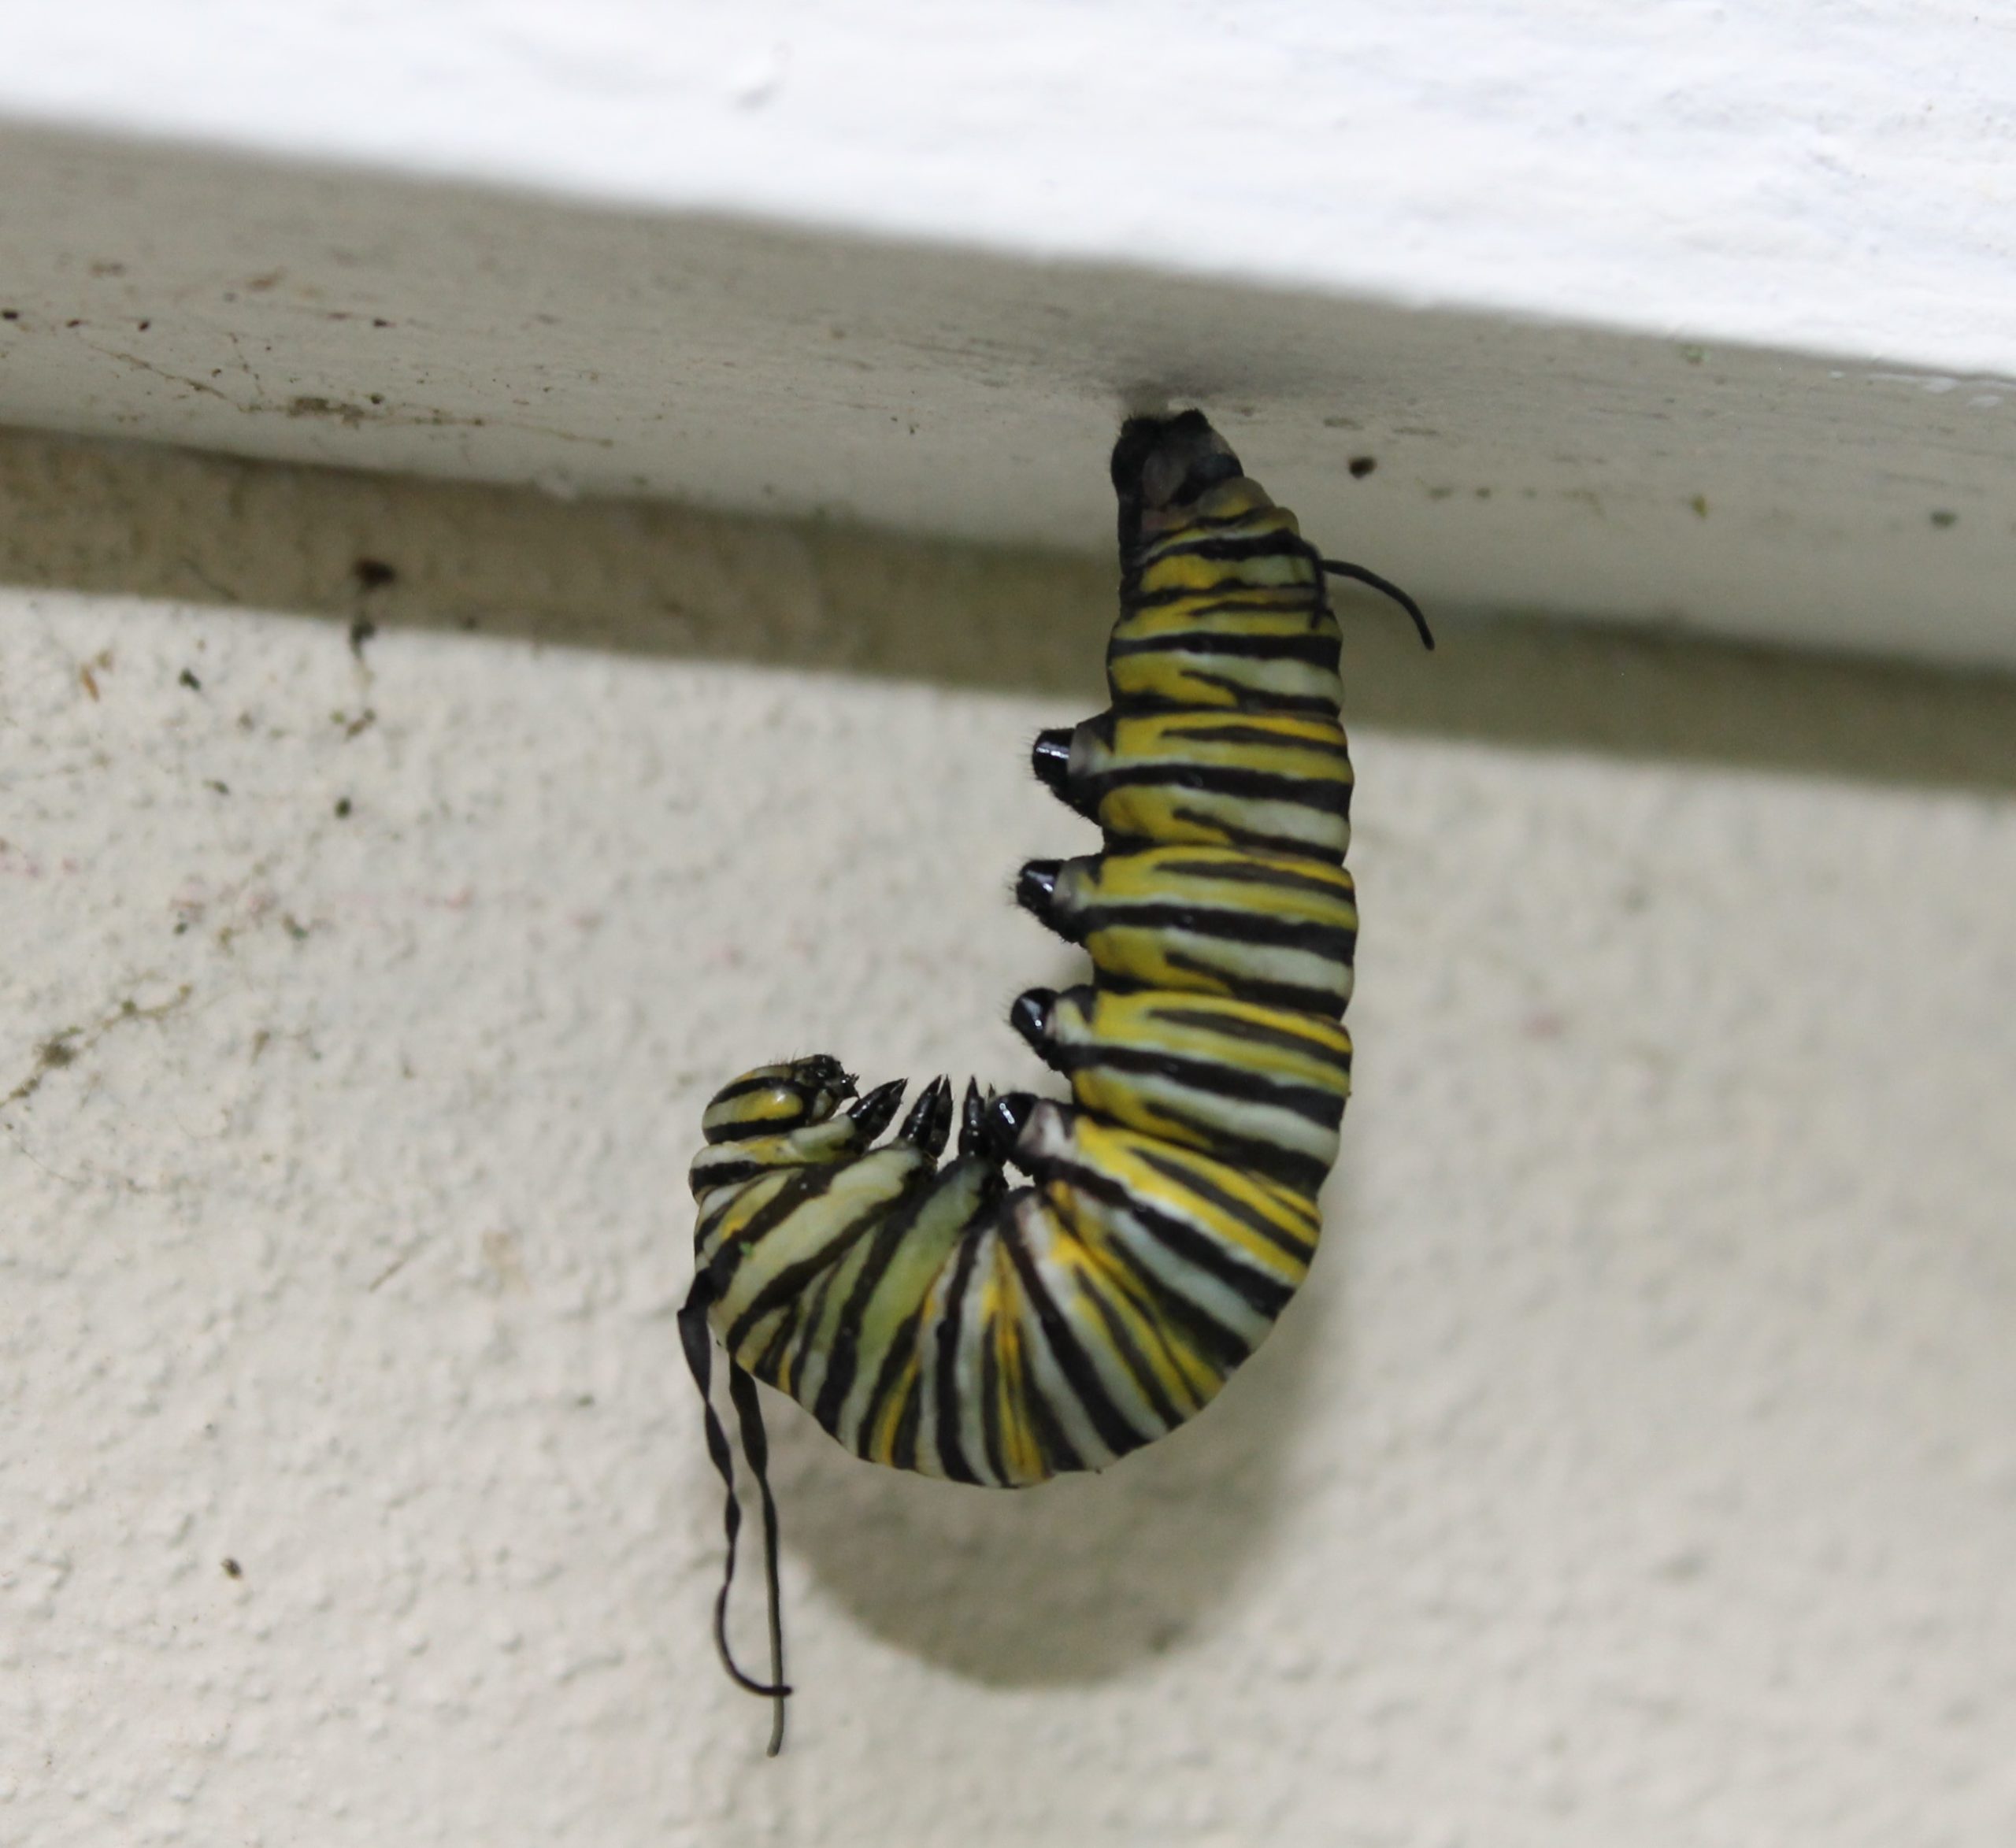 A Monarch Butterfly caterpillar about to pupate